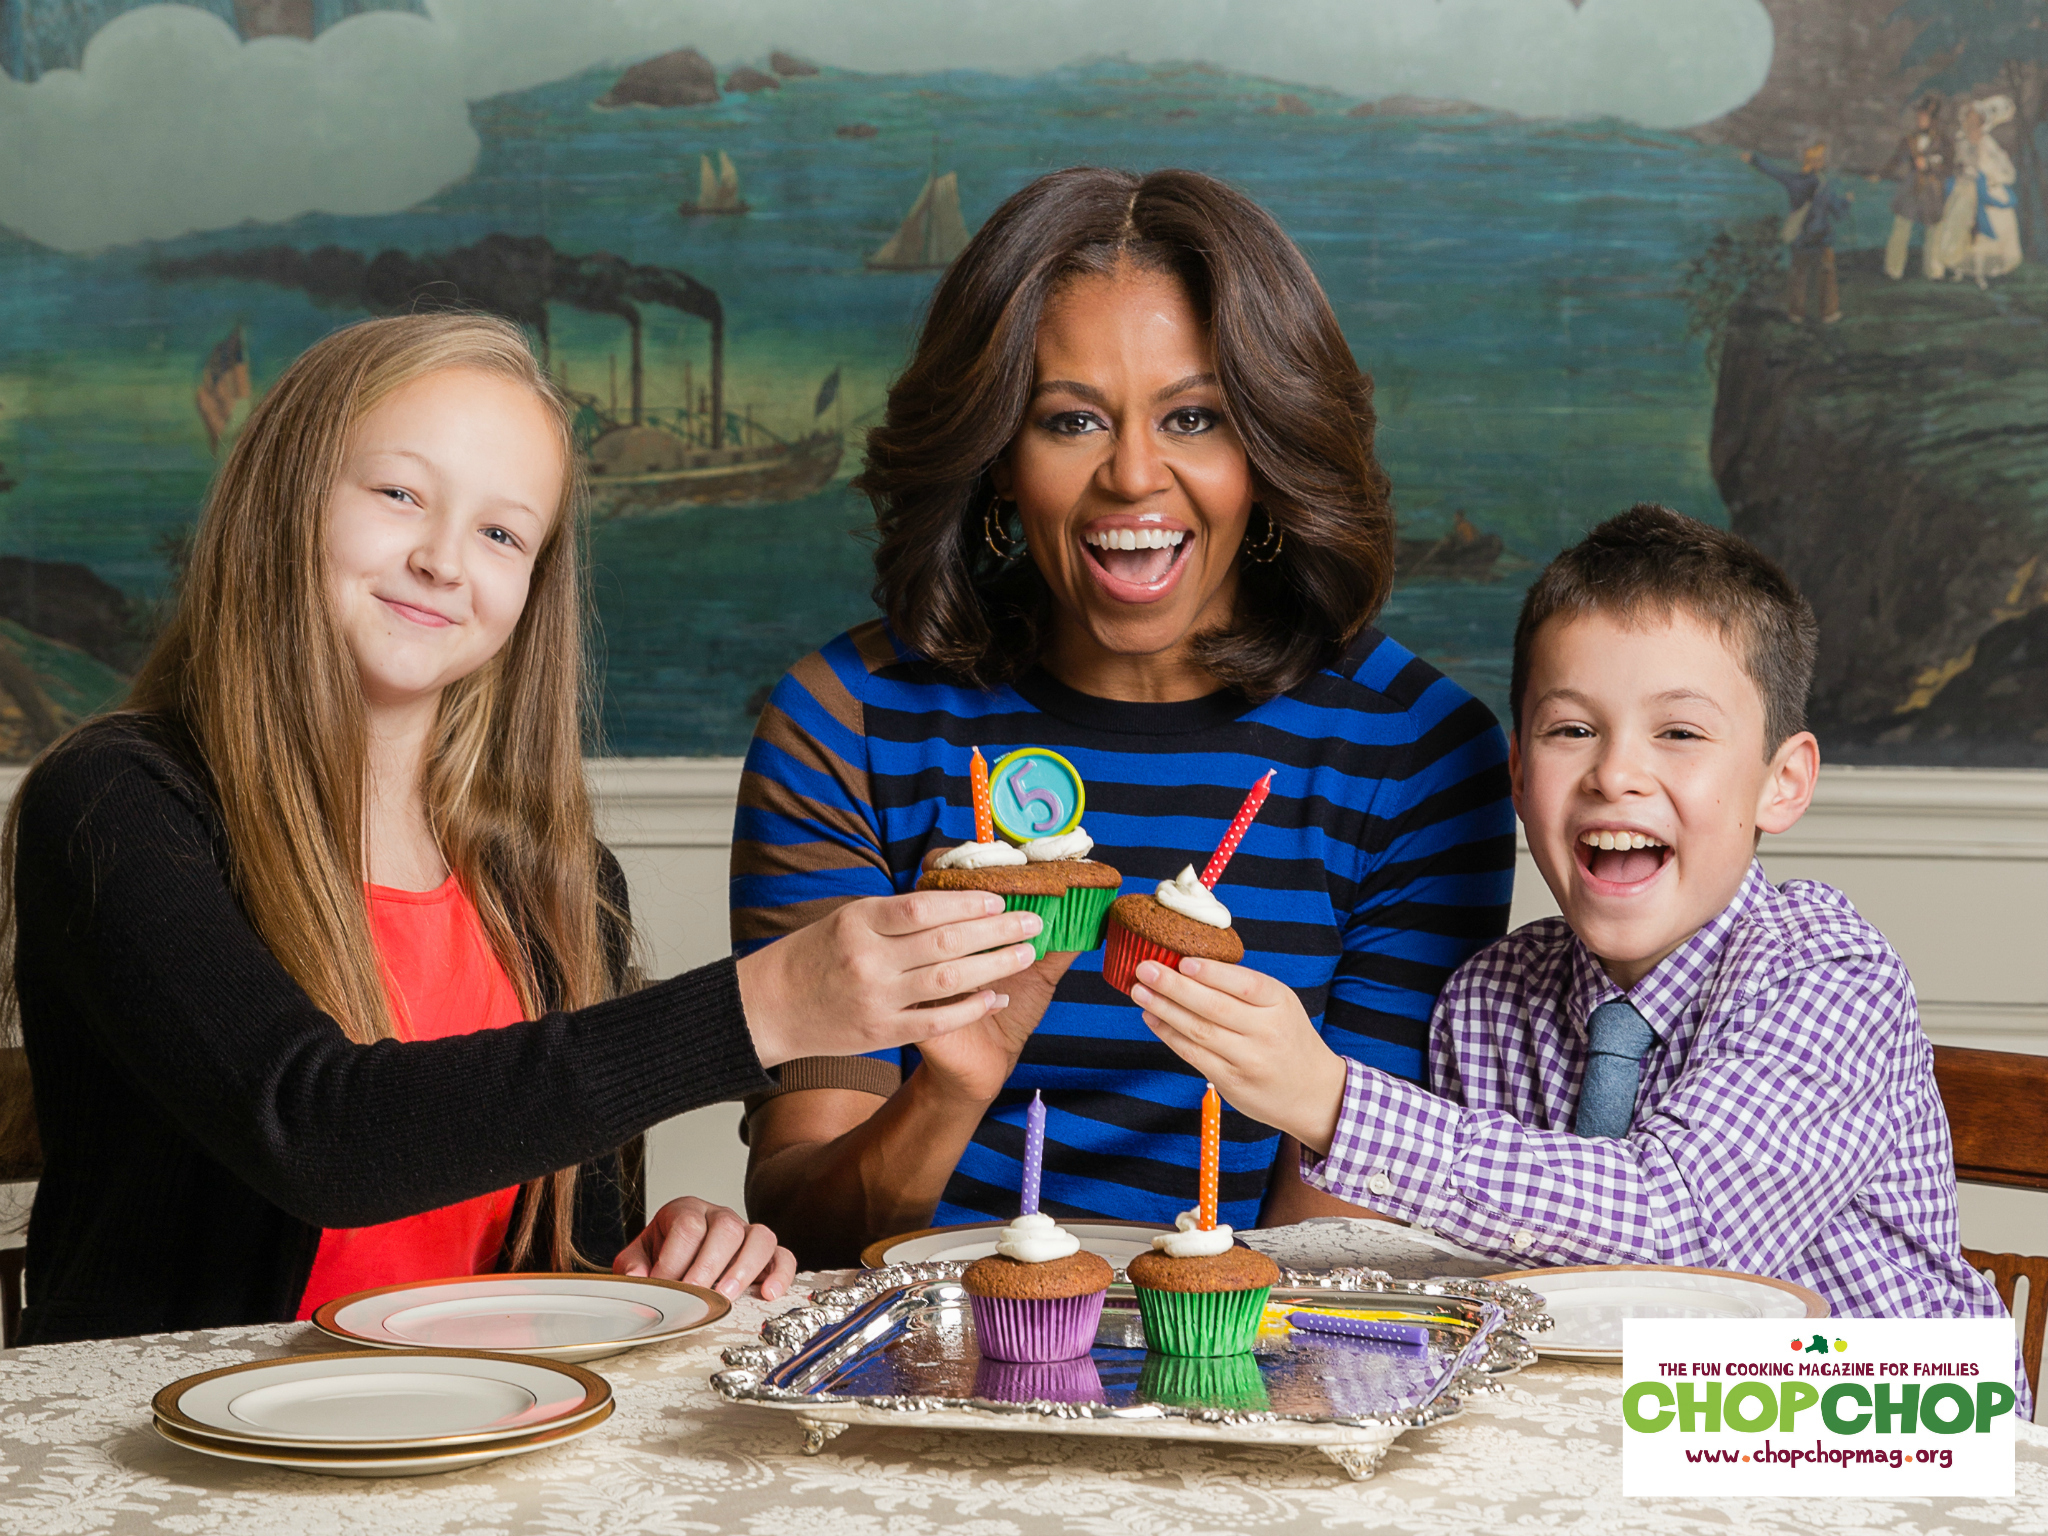 Mrs. Obama had a 5th birthday celebration for ChopChop and Let's Move!